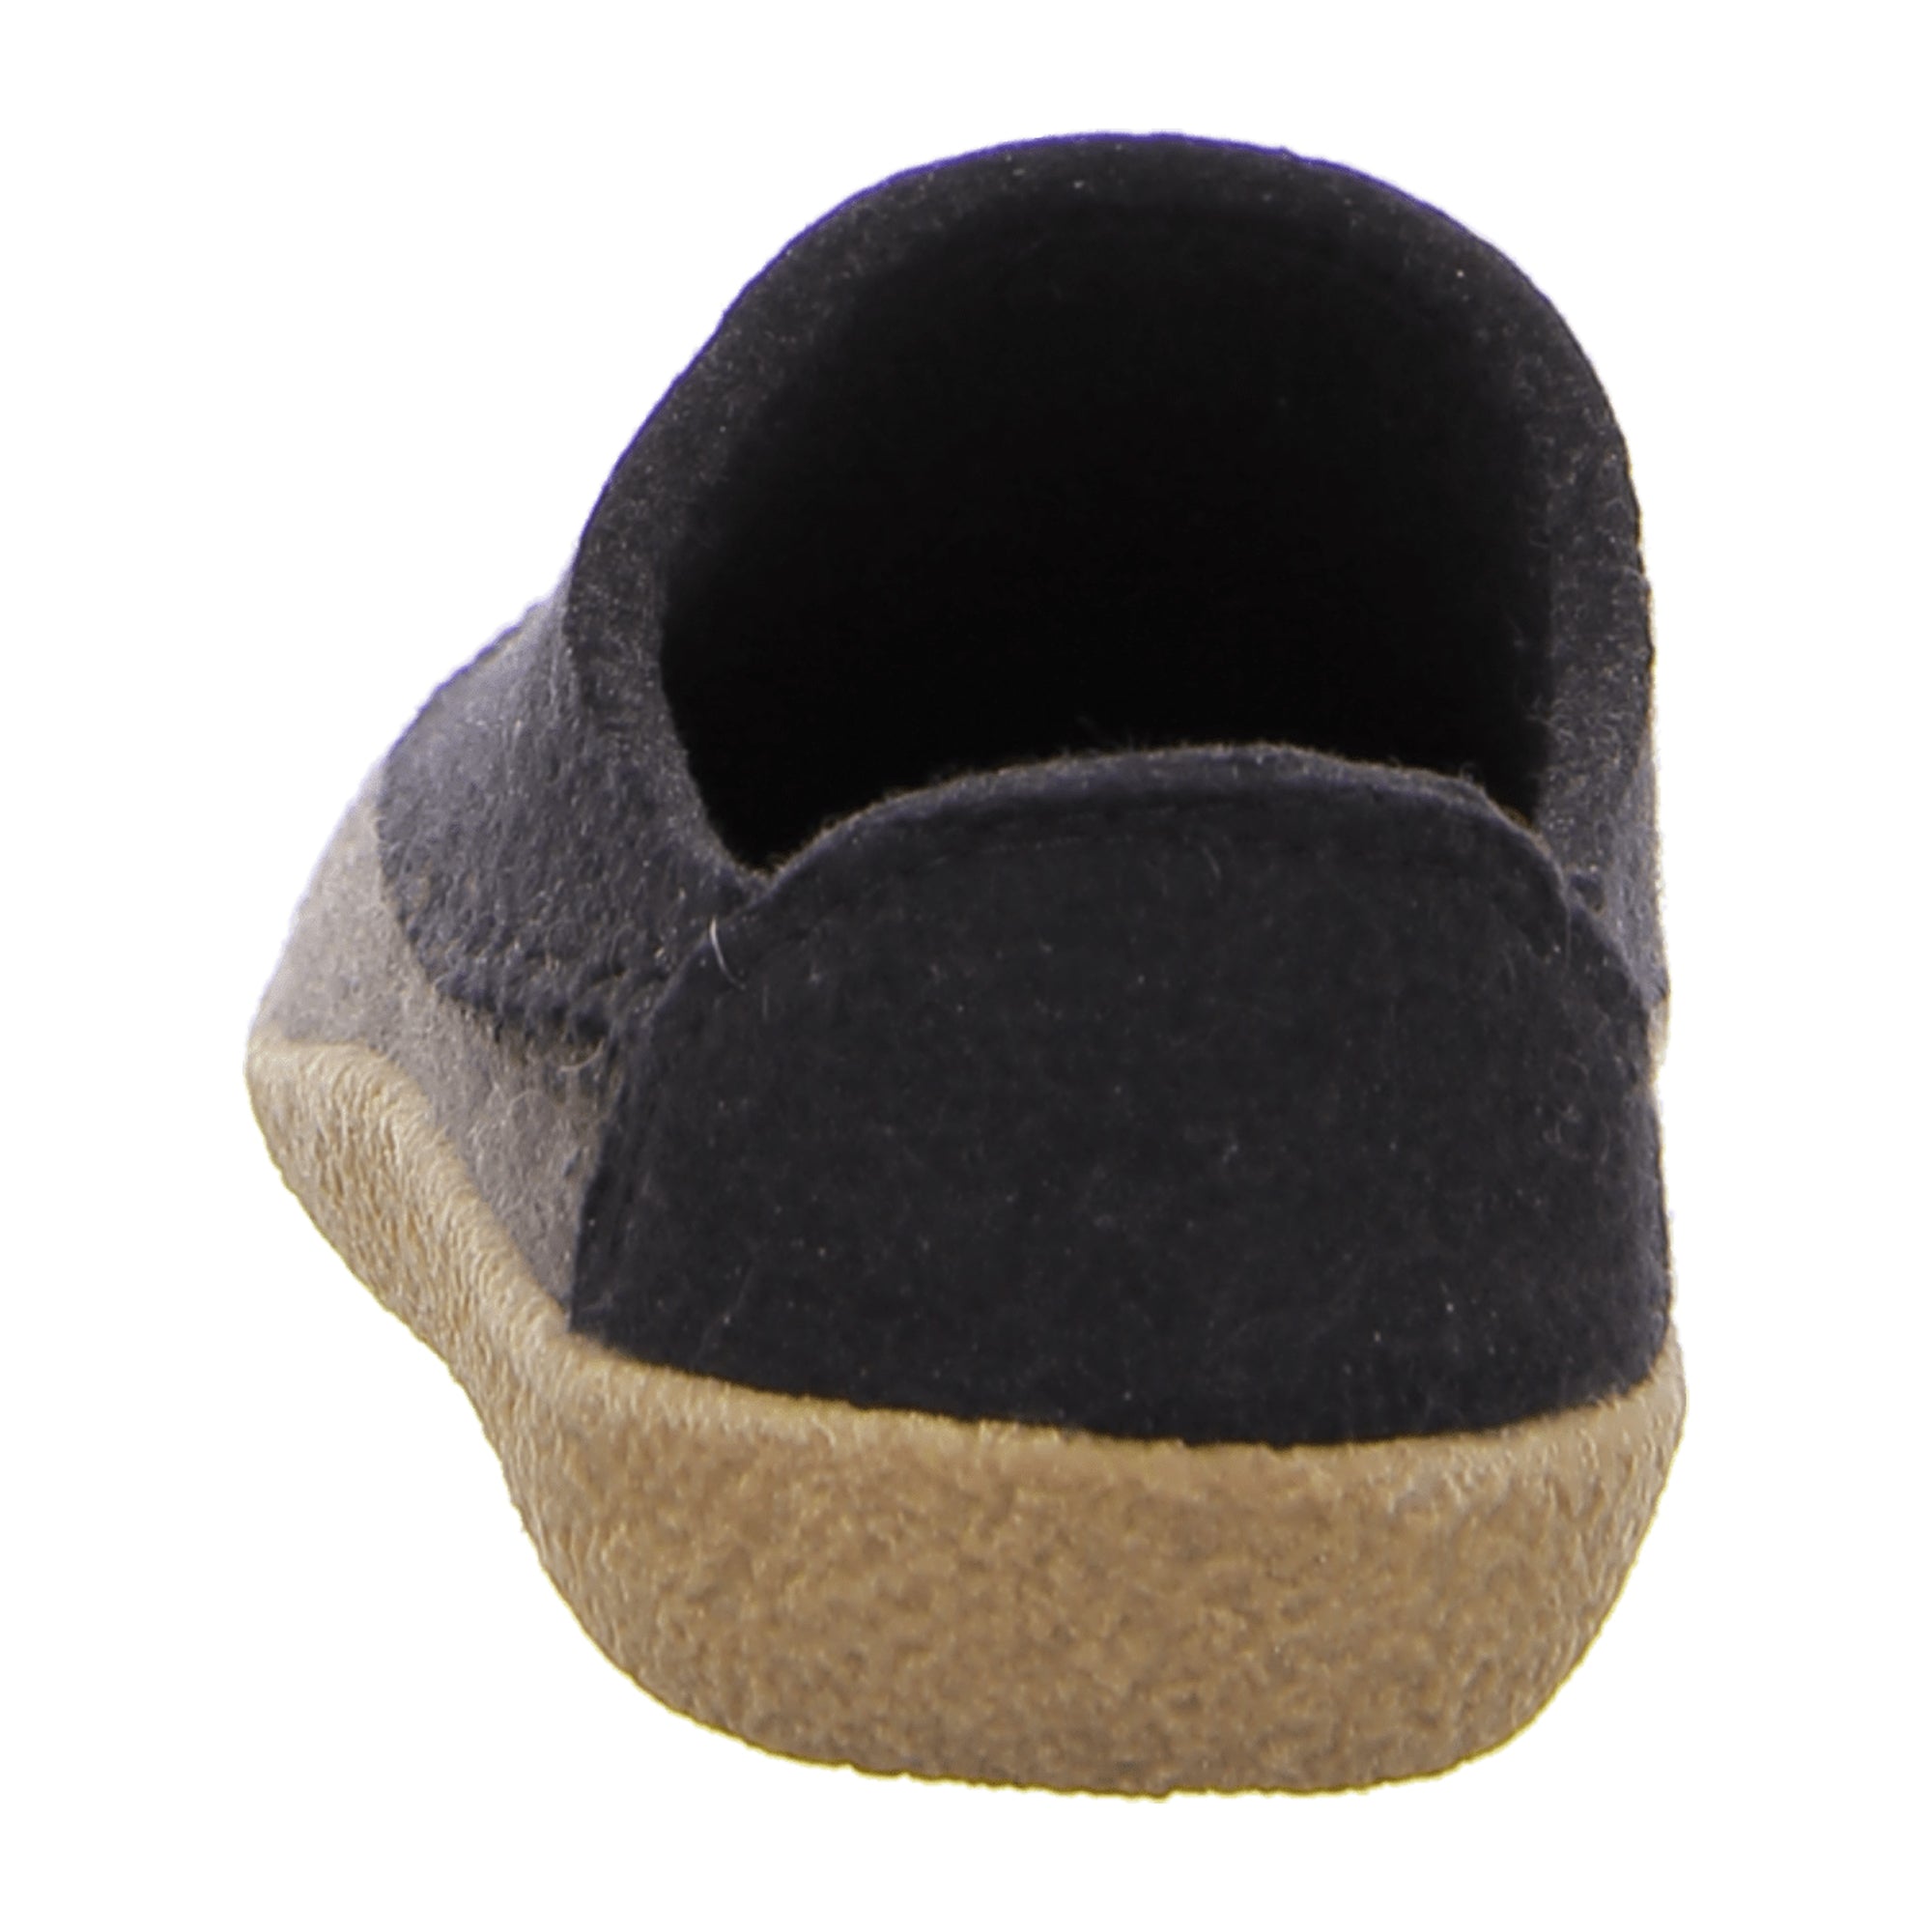 Haflinger Blizzard Credo-Duo Men's Slippers - Durable and Stylish Black Wool Slippers